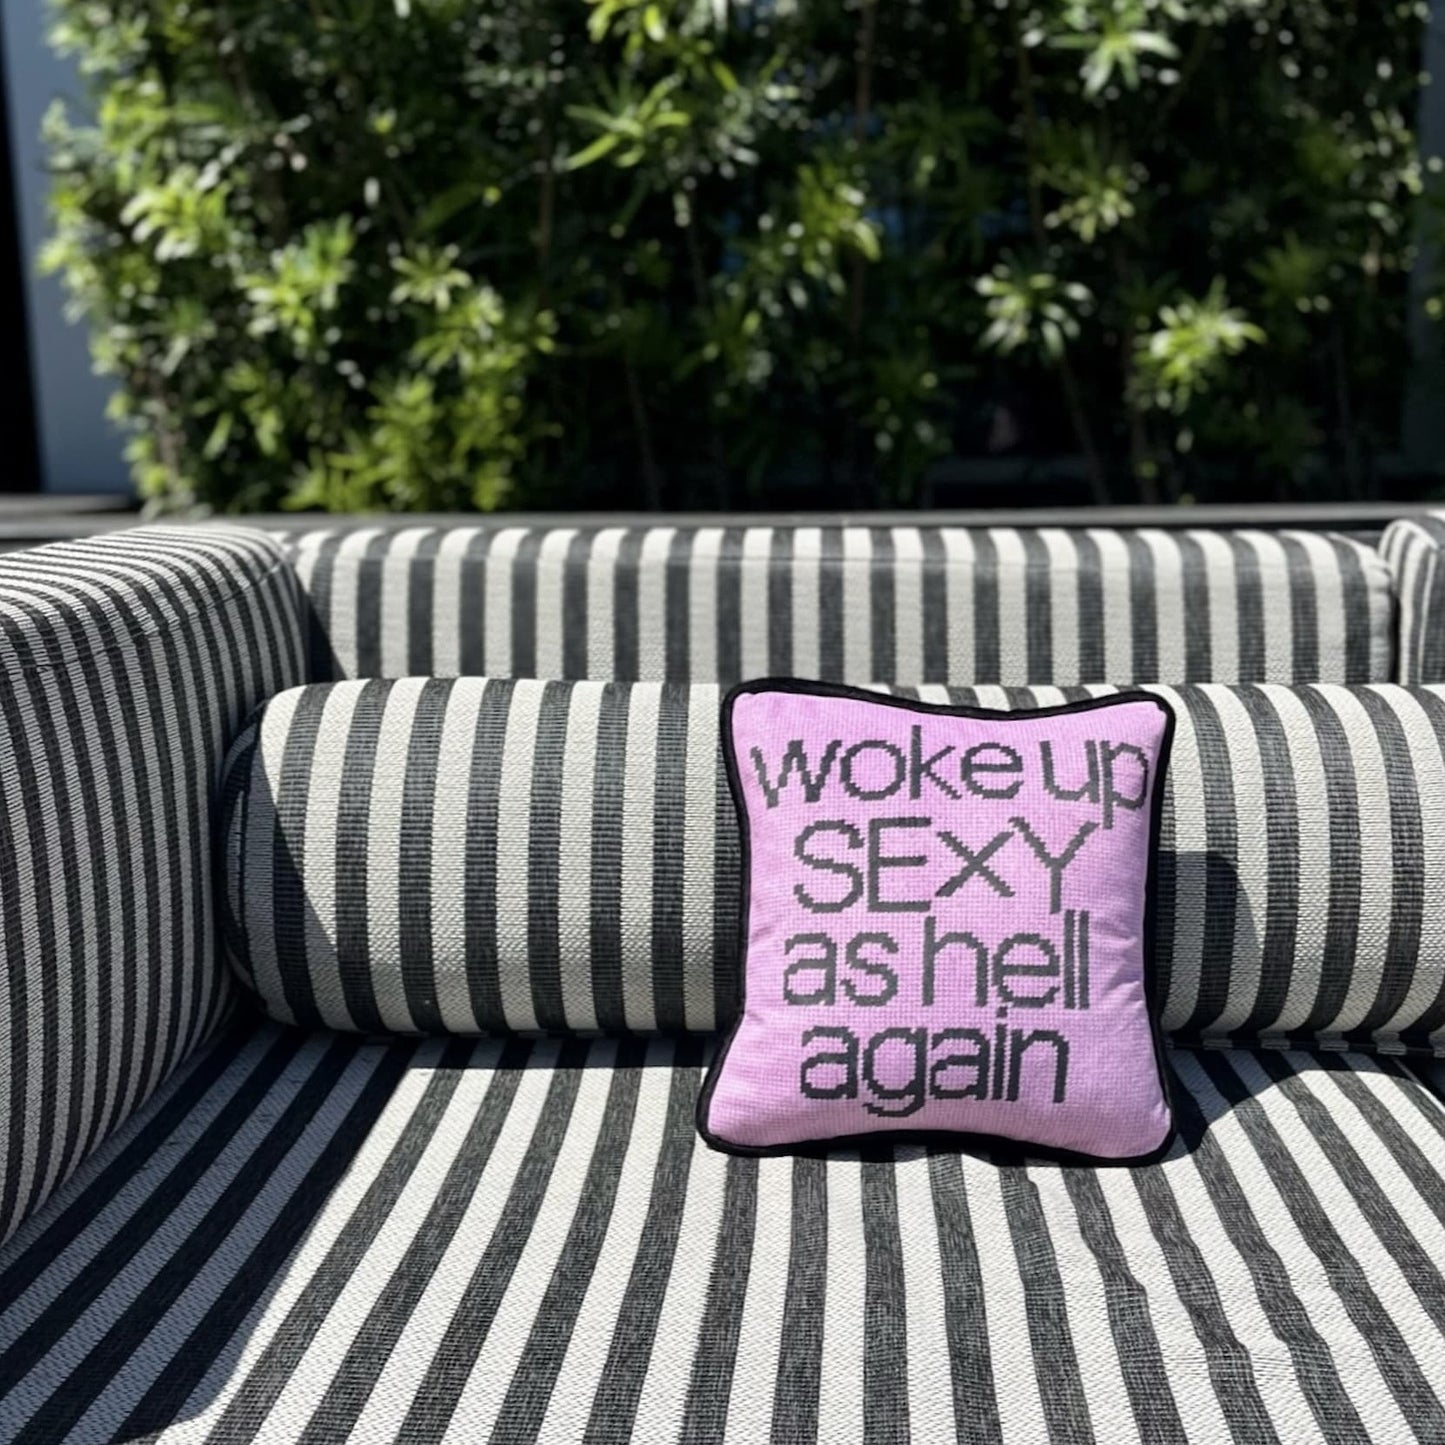 woke up sexy as hell in black, centered on pillow with pink background, striped sofa miami